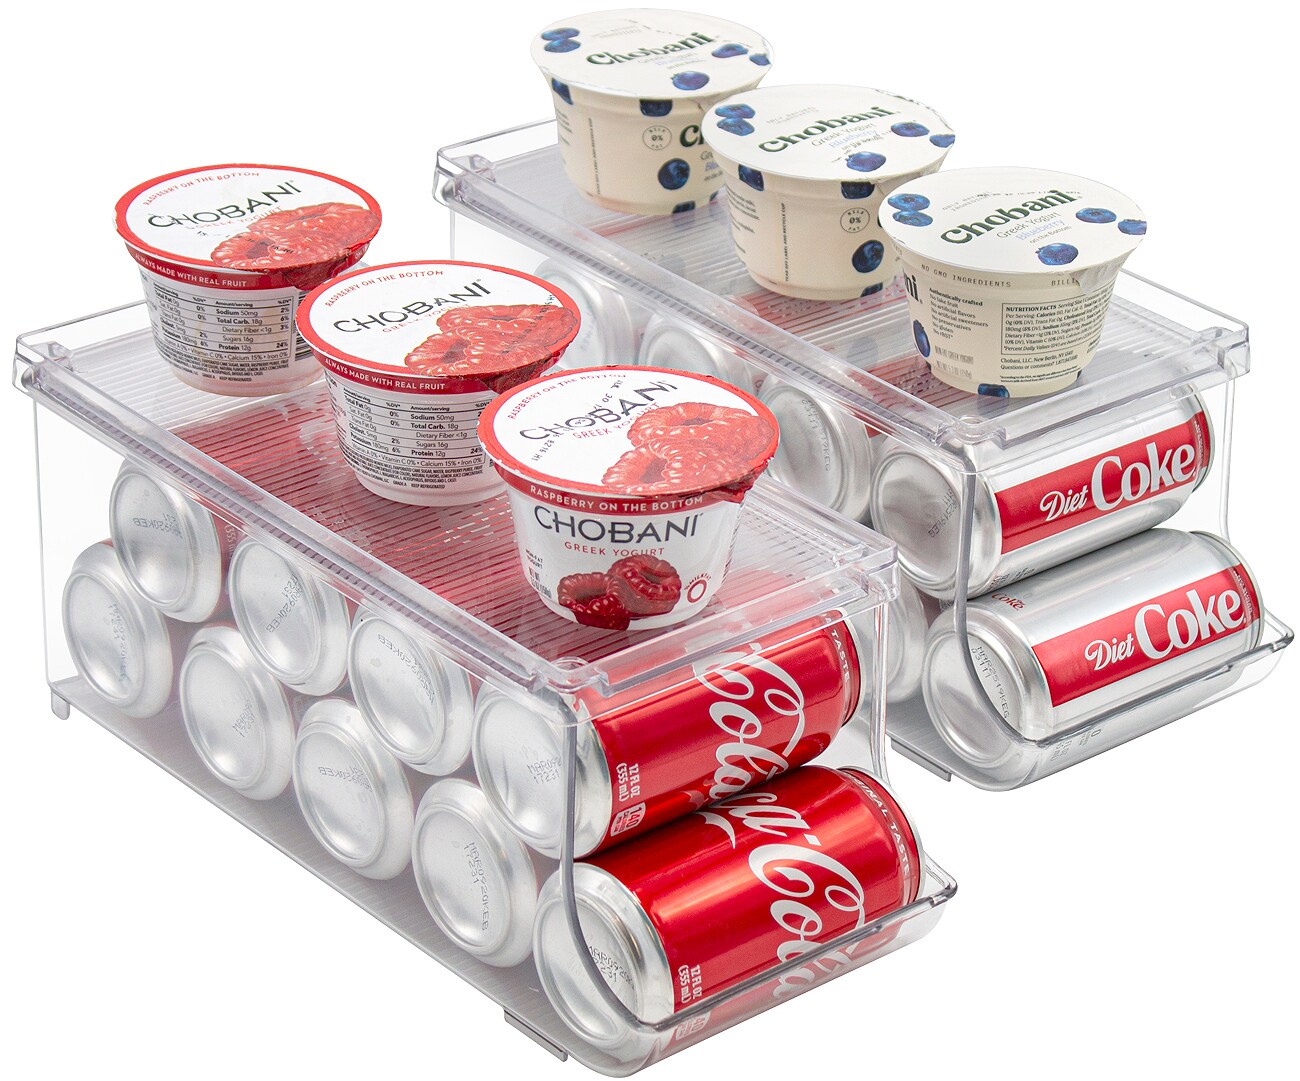 Sorbus Soda Can Organizer with Lid ,Clear